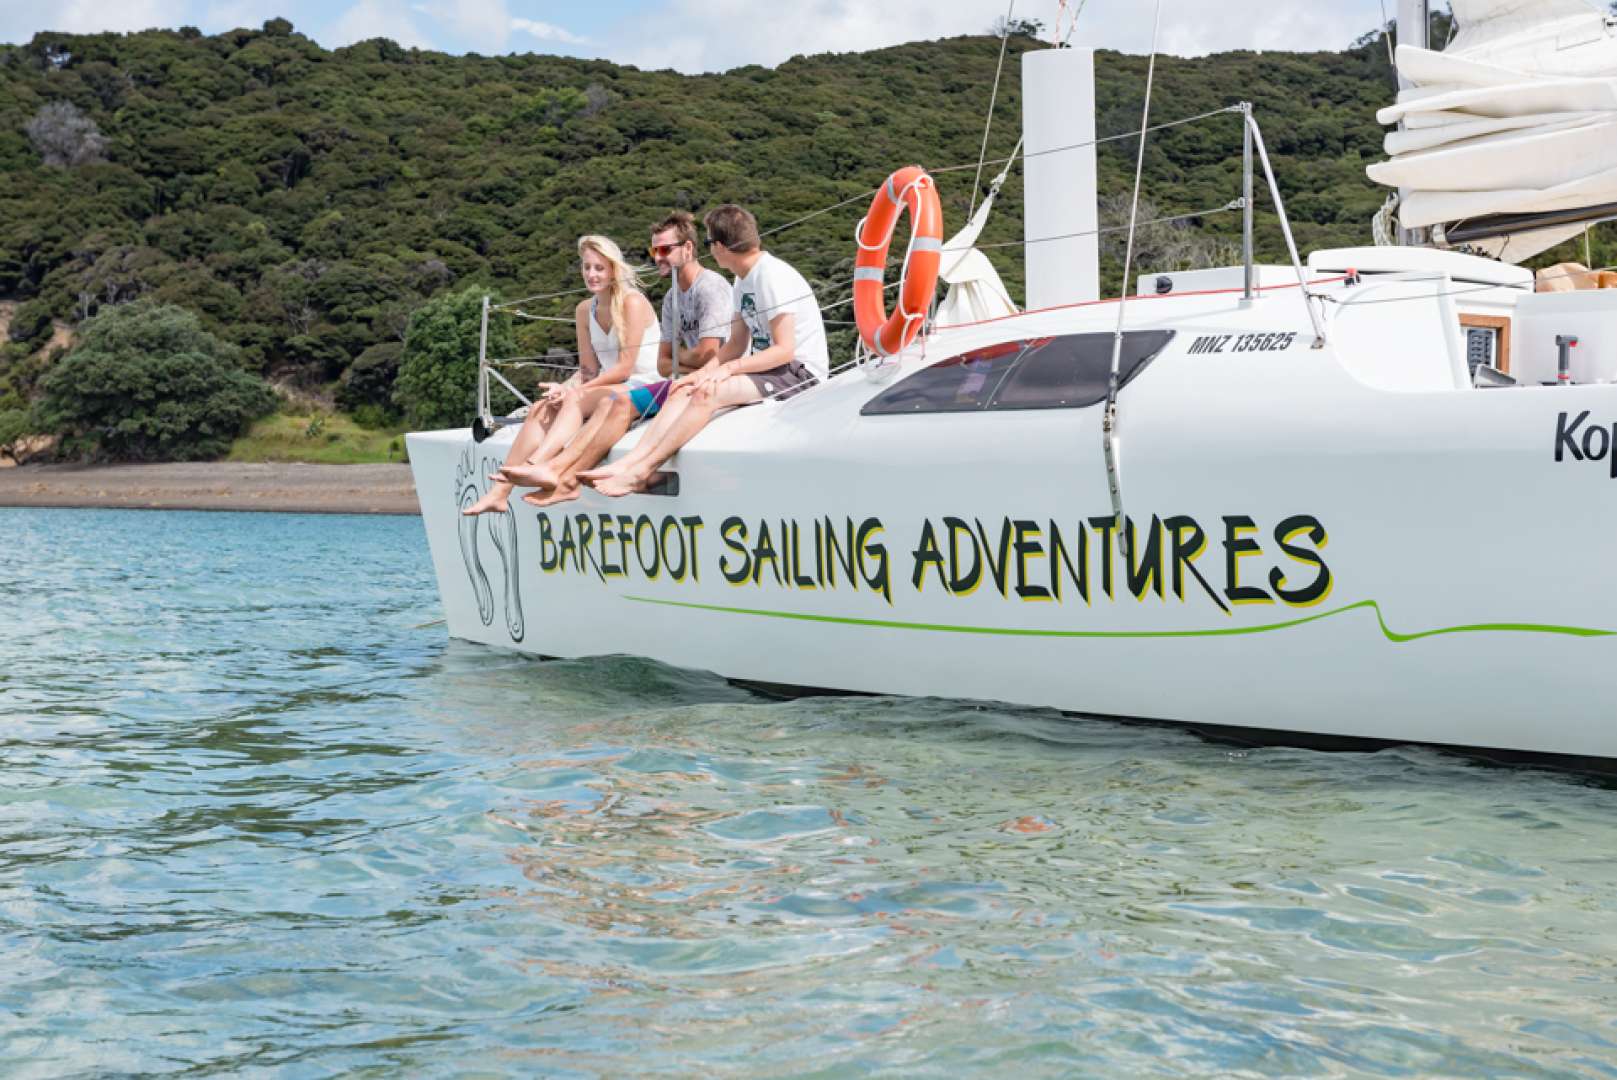 Barefoot Sailing Adventures in the Bay of Islands Evening Cruise Activity